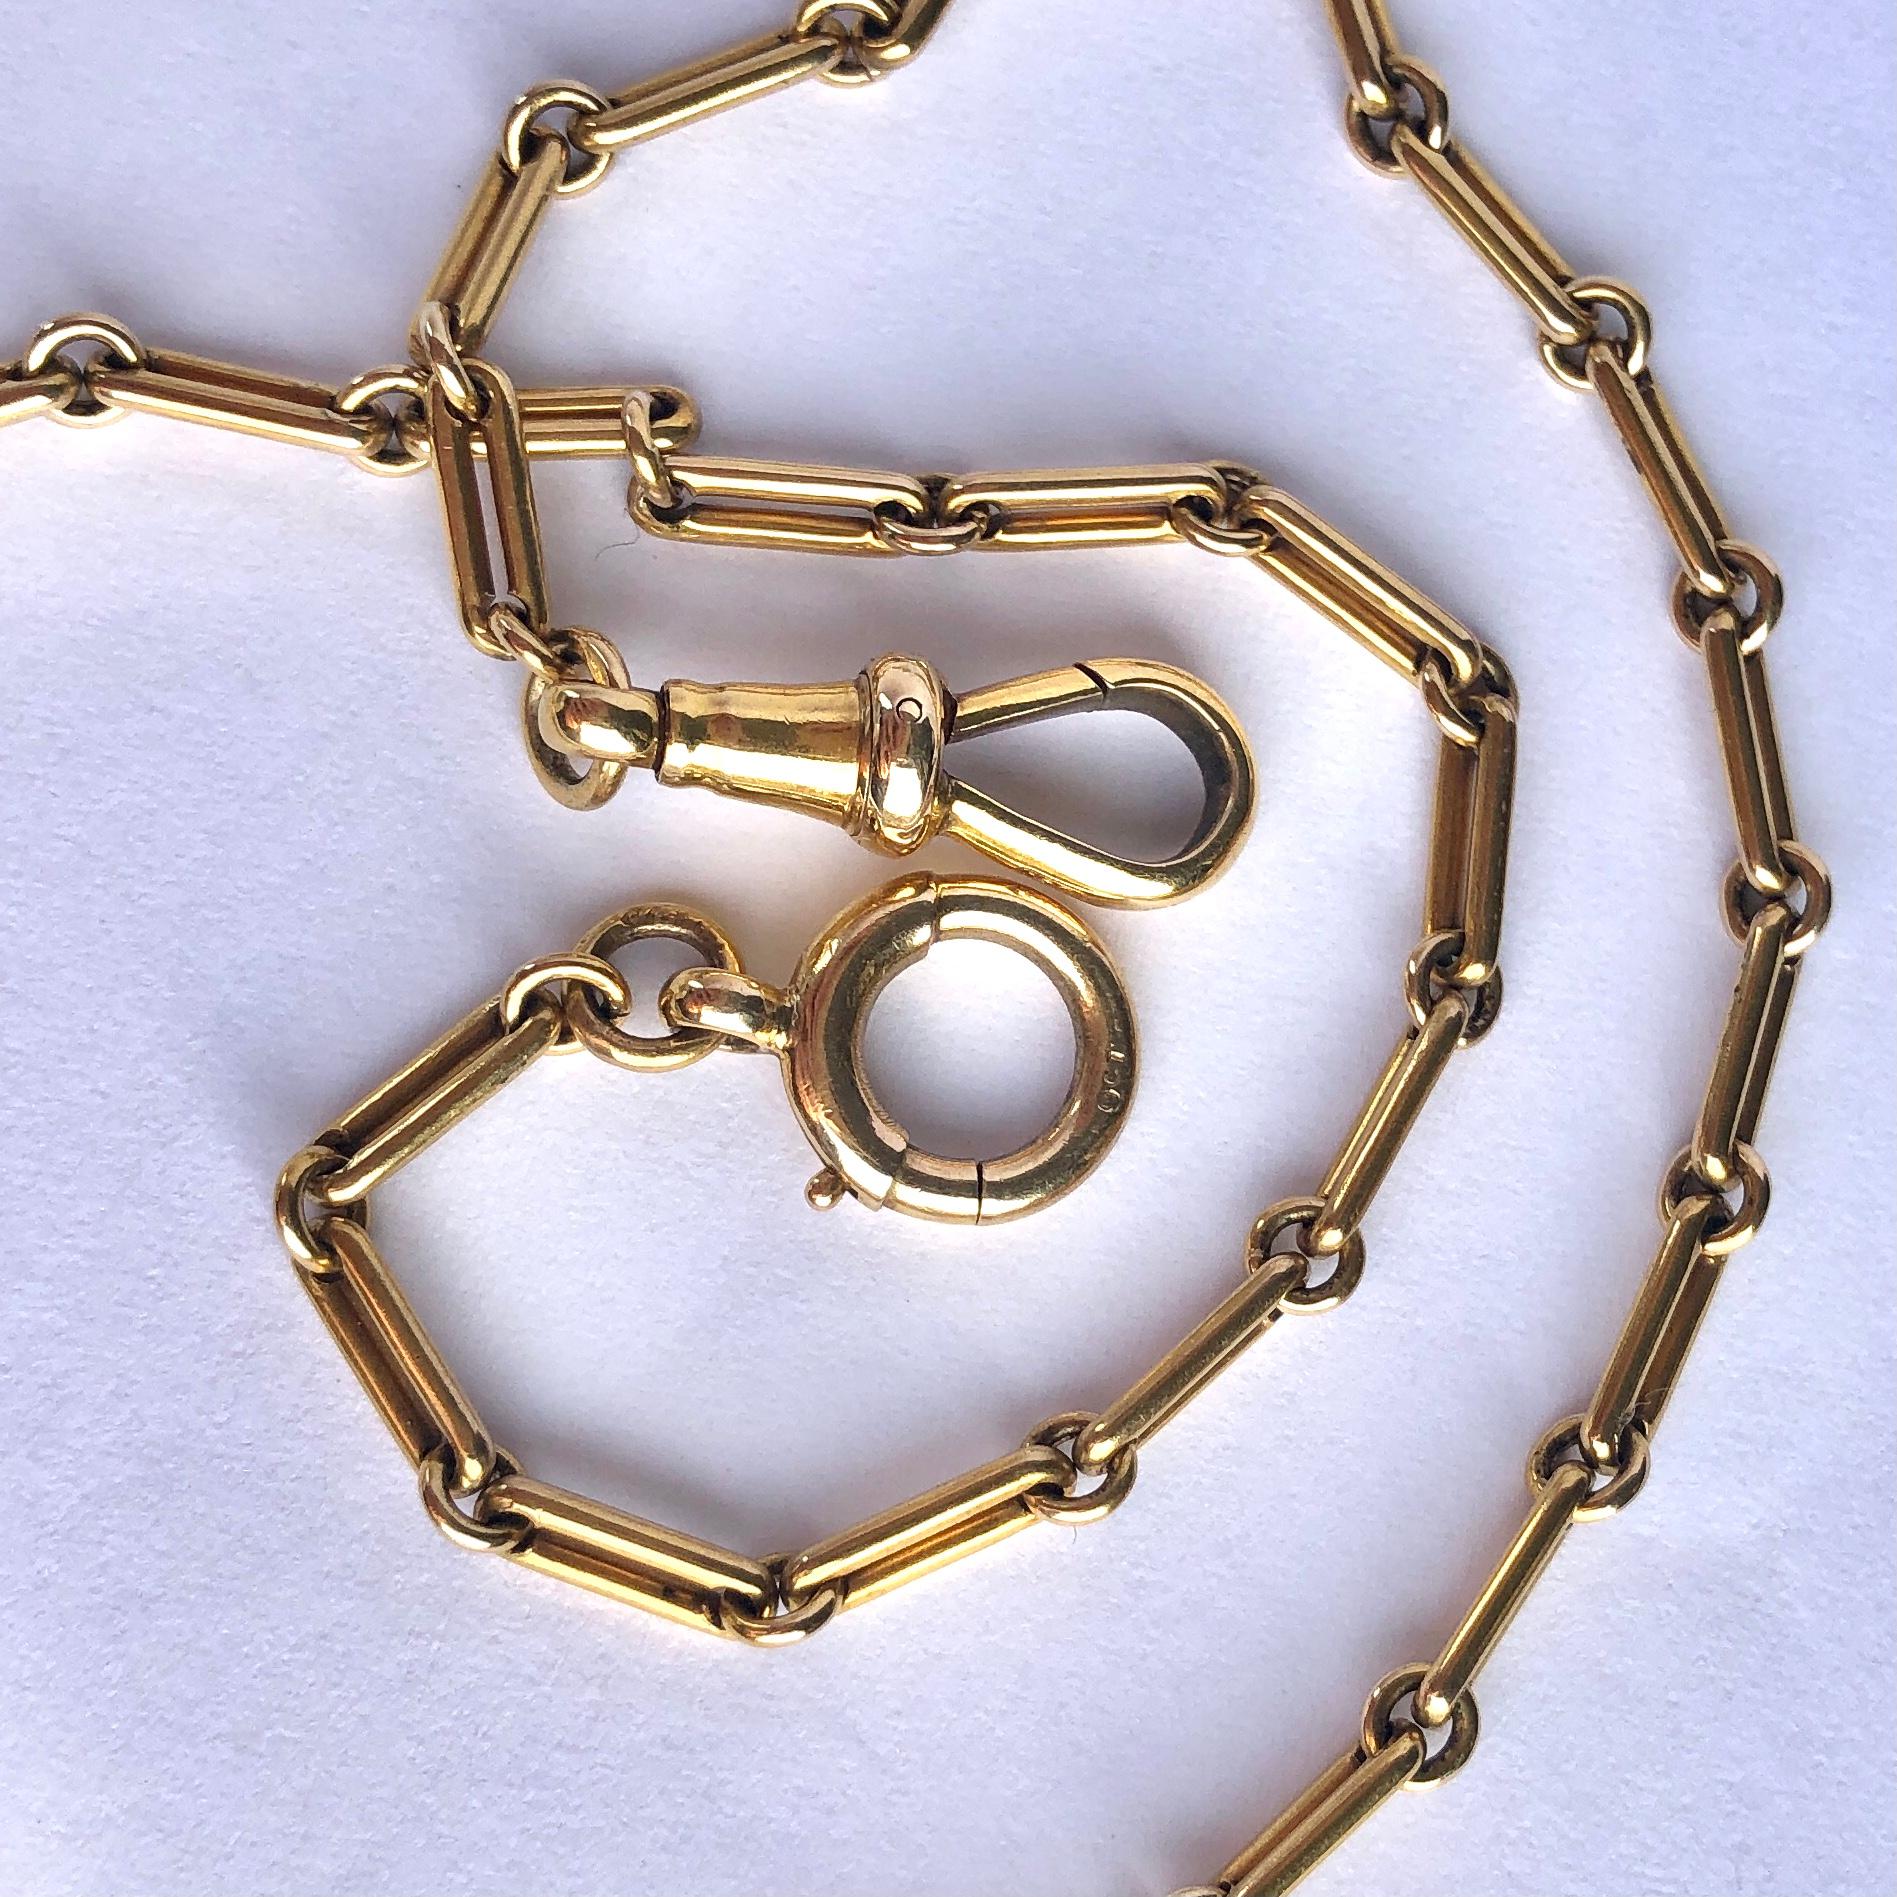 This gorgeous and delicate 9 carat gold chain has a dog clip on one end and a bolt clip on the other. In the middle there is a t-bar on a moveable loop.

Length: 34.5cm

Weight: 10.3g